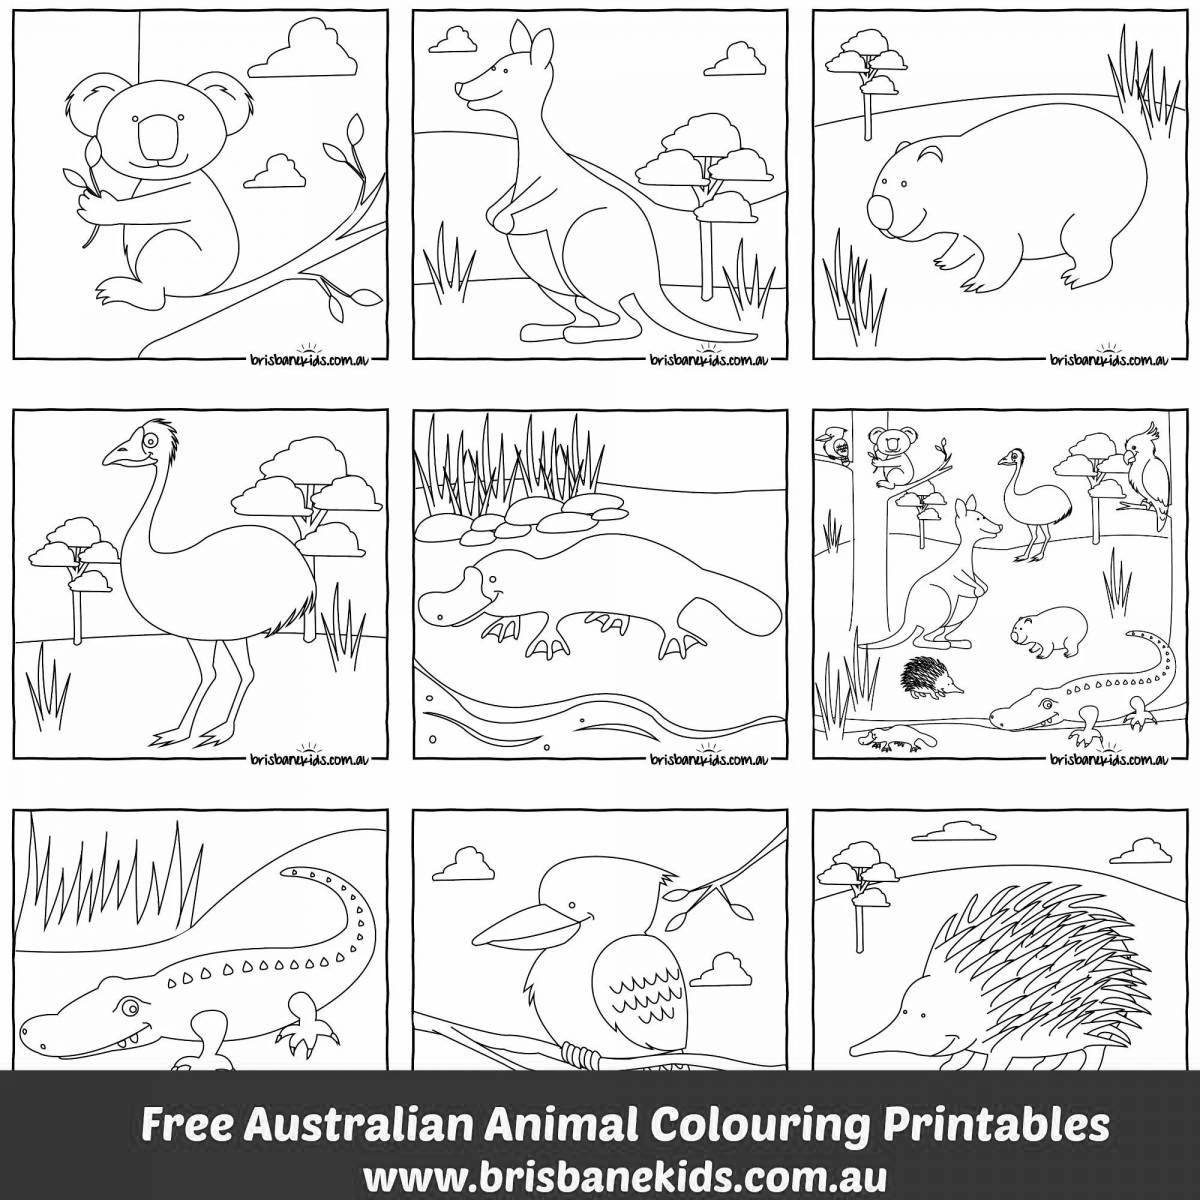 Outstanding Australian animal coloring book for kids